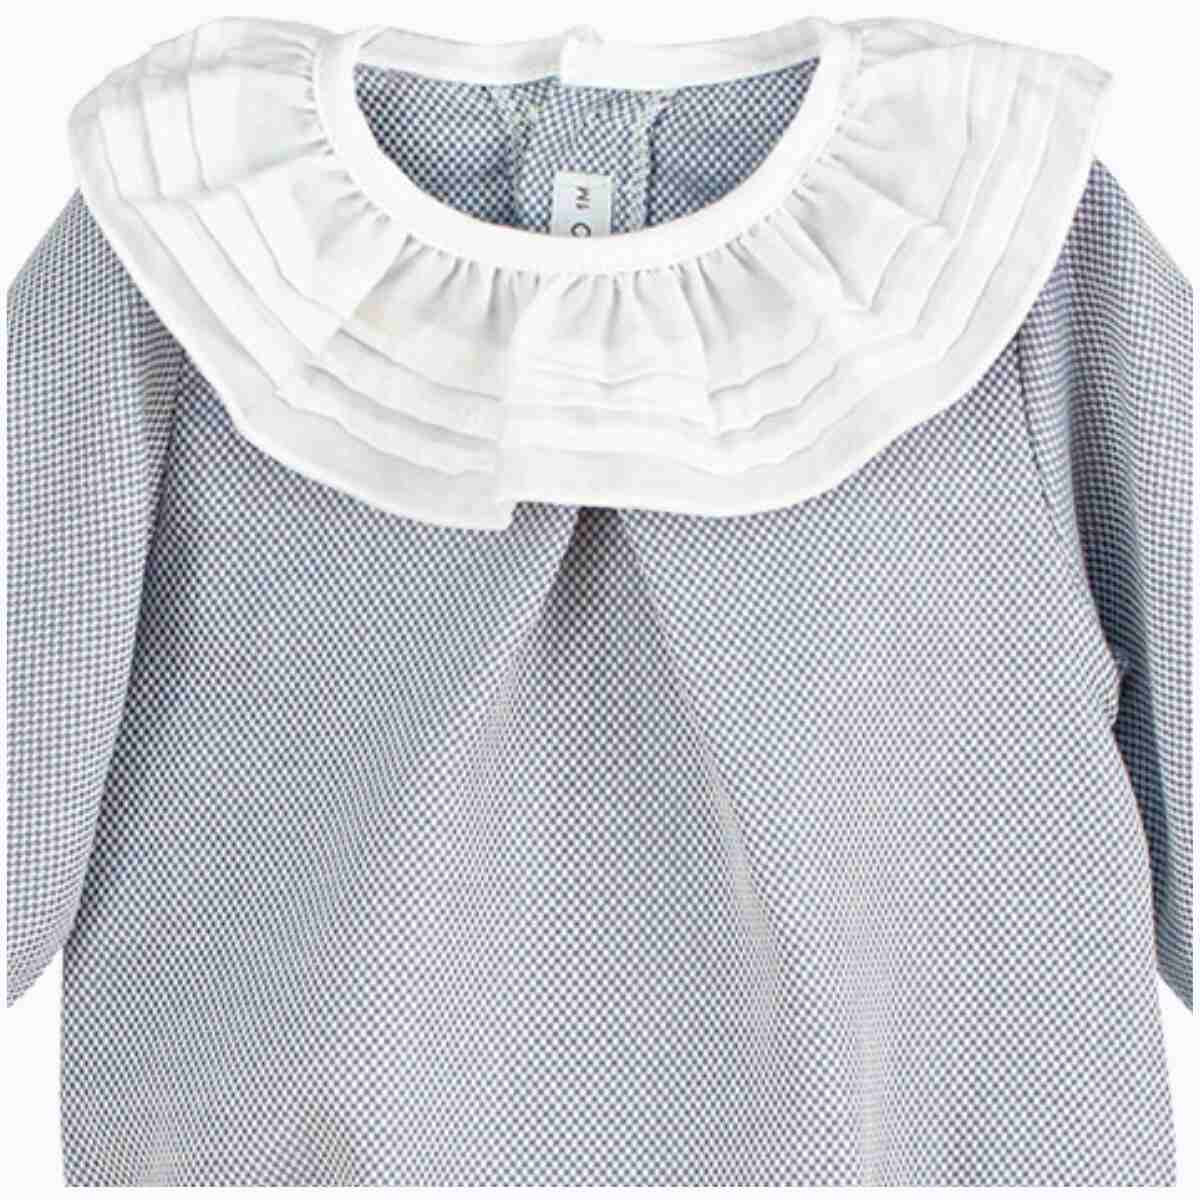 LONG SLEEVE WIDE FRILLED NECK OVERALL CALAMARO - 2